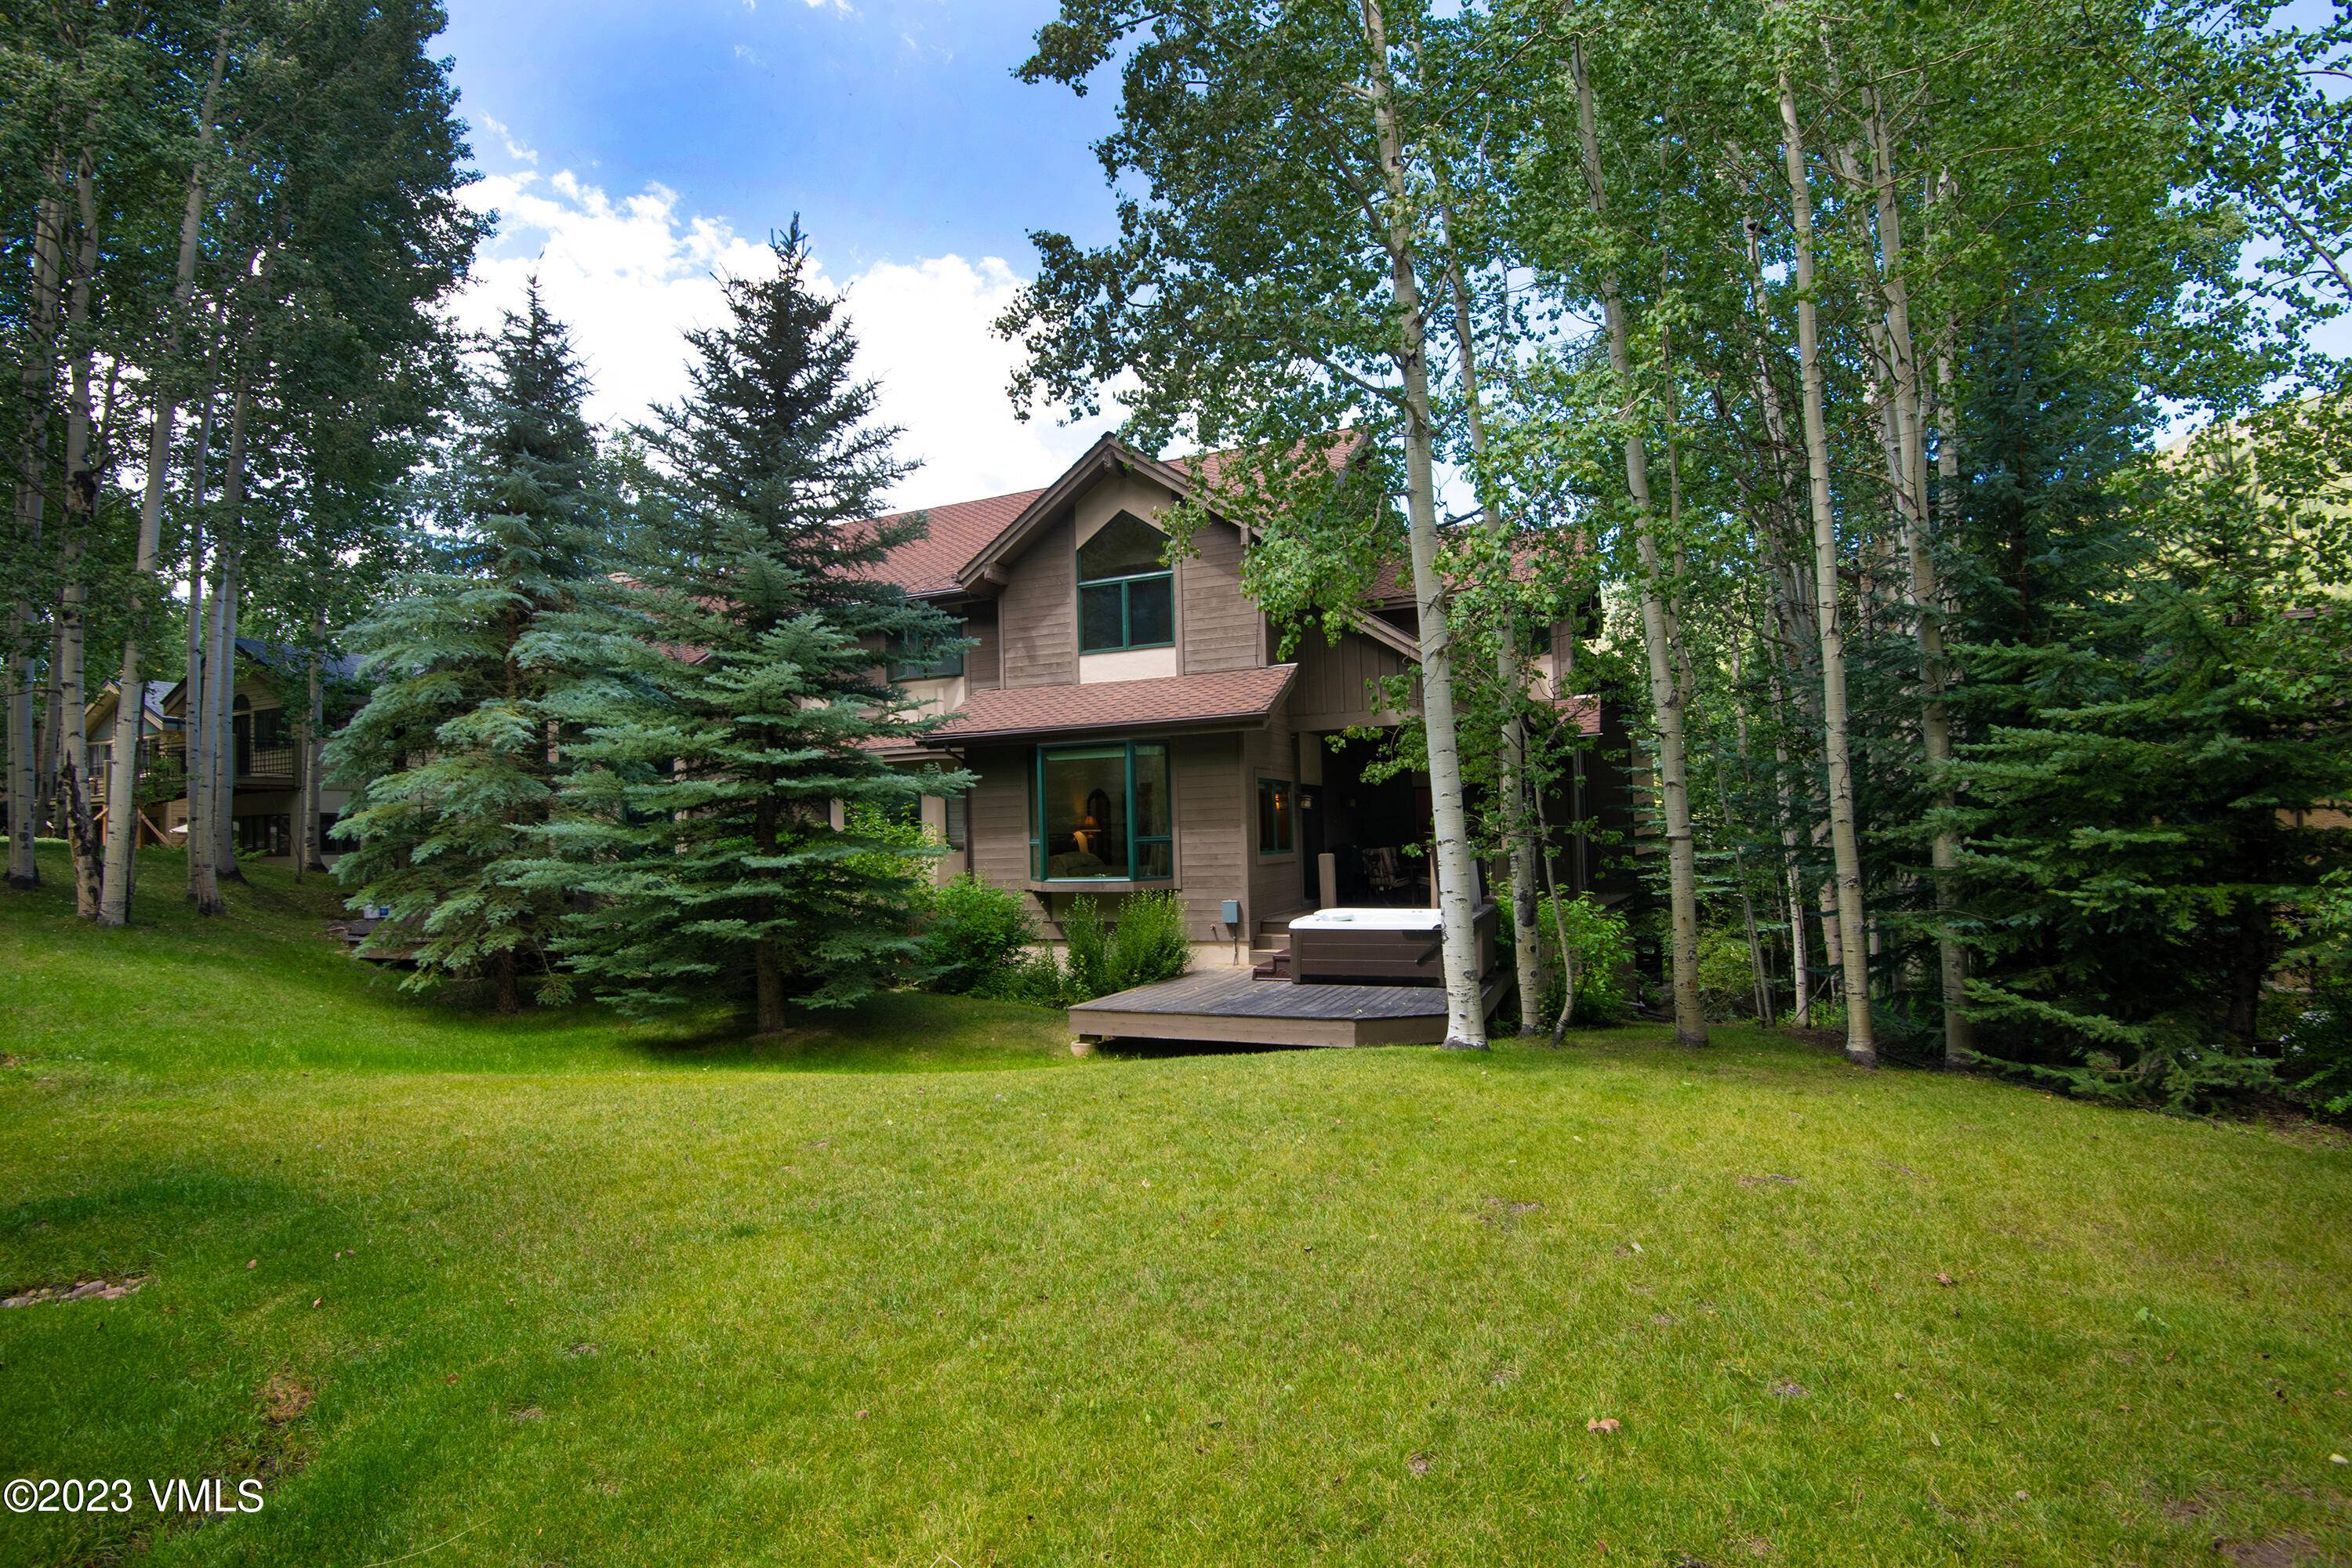 Spacious, like new 5 bedroom, 7 bath, located in Vail's quiet Highland Meadows neighborhood.